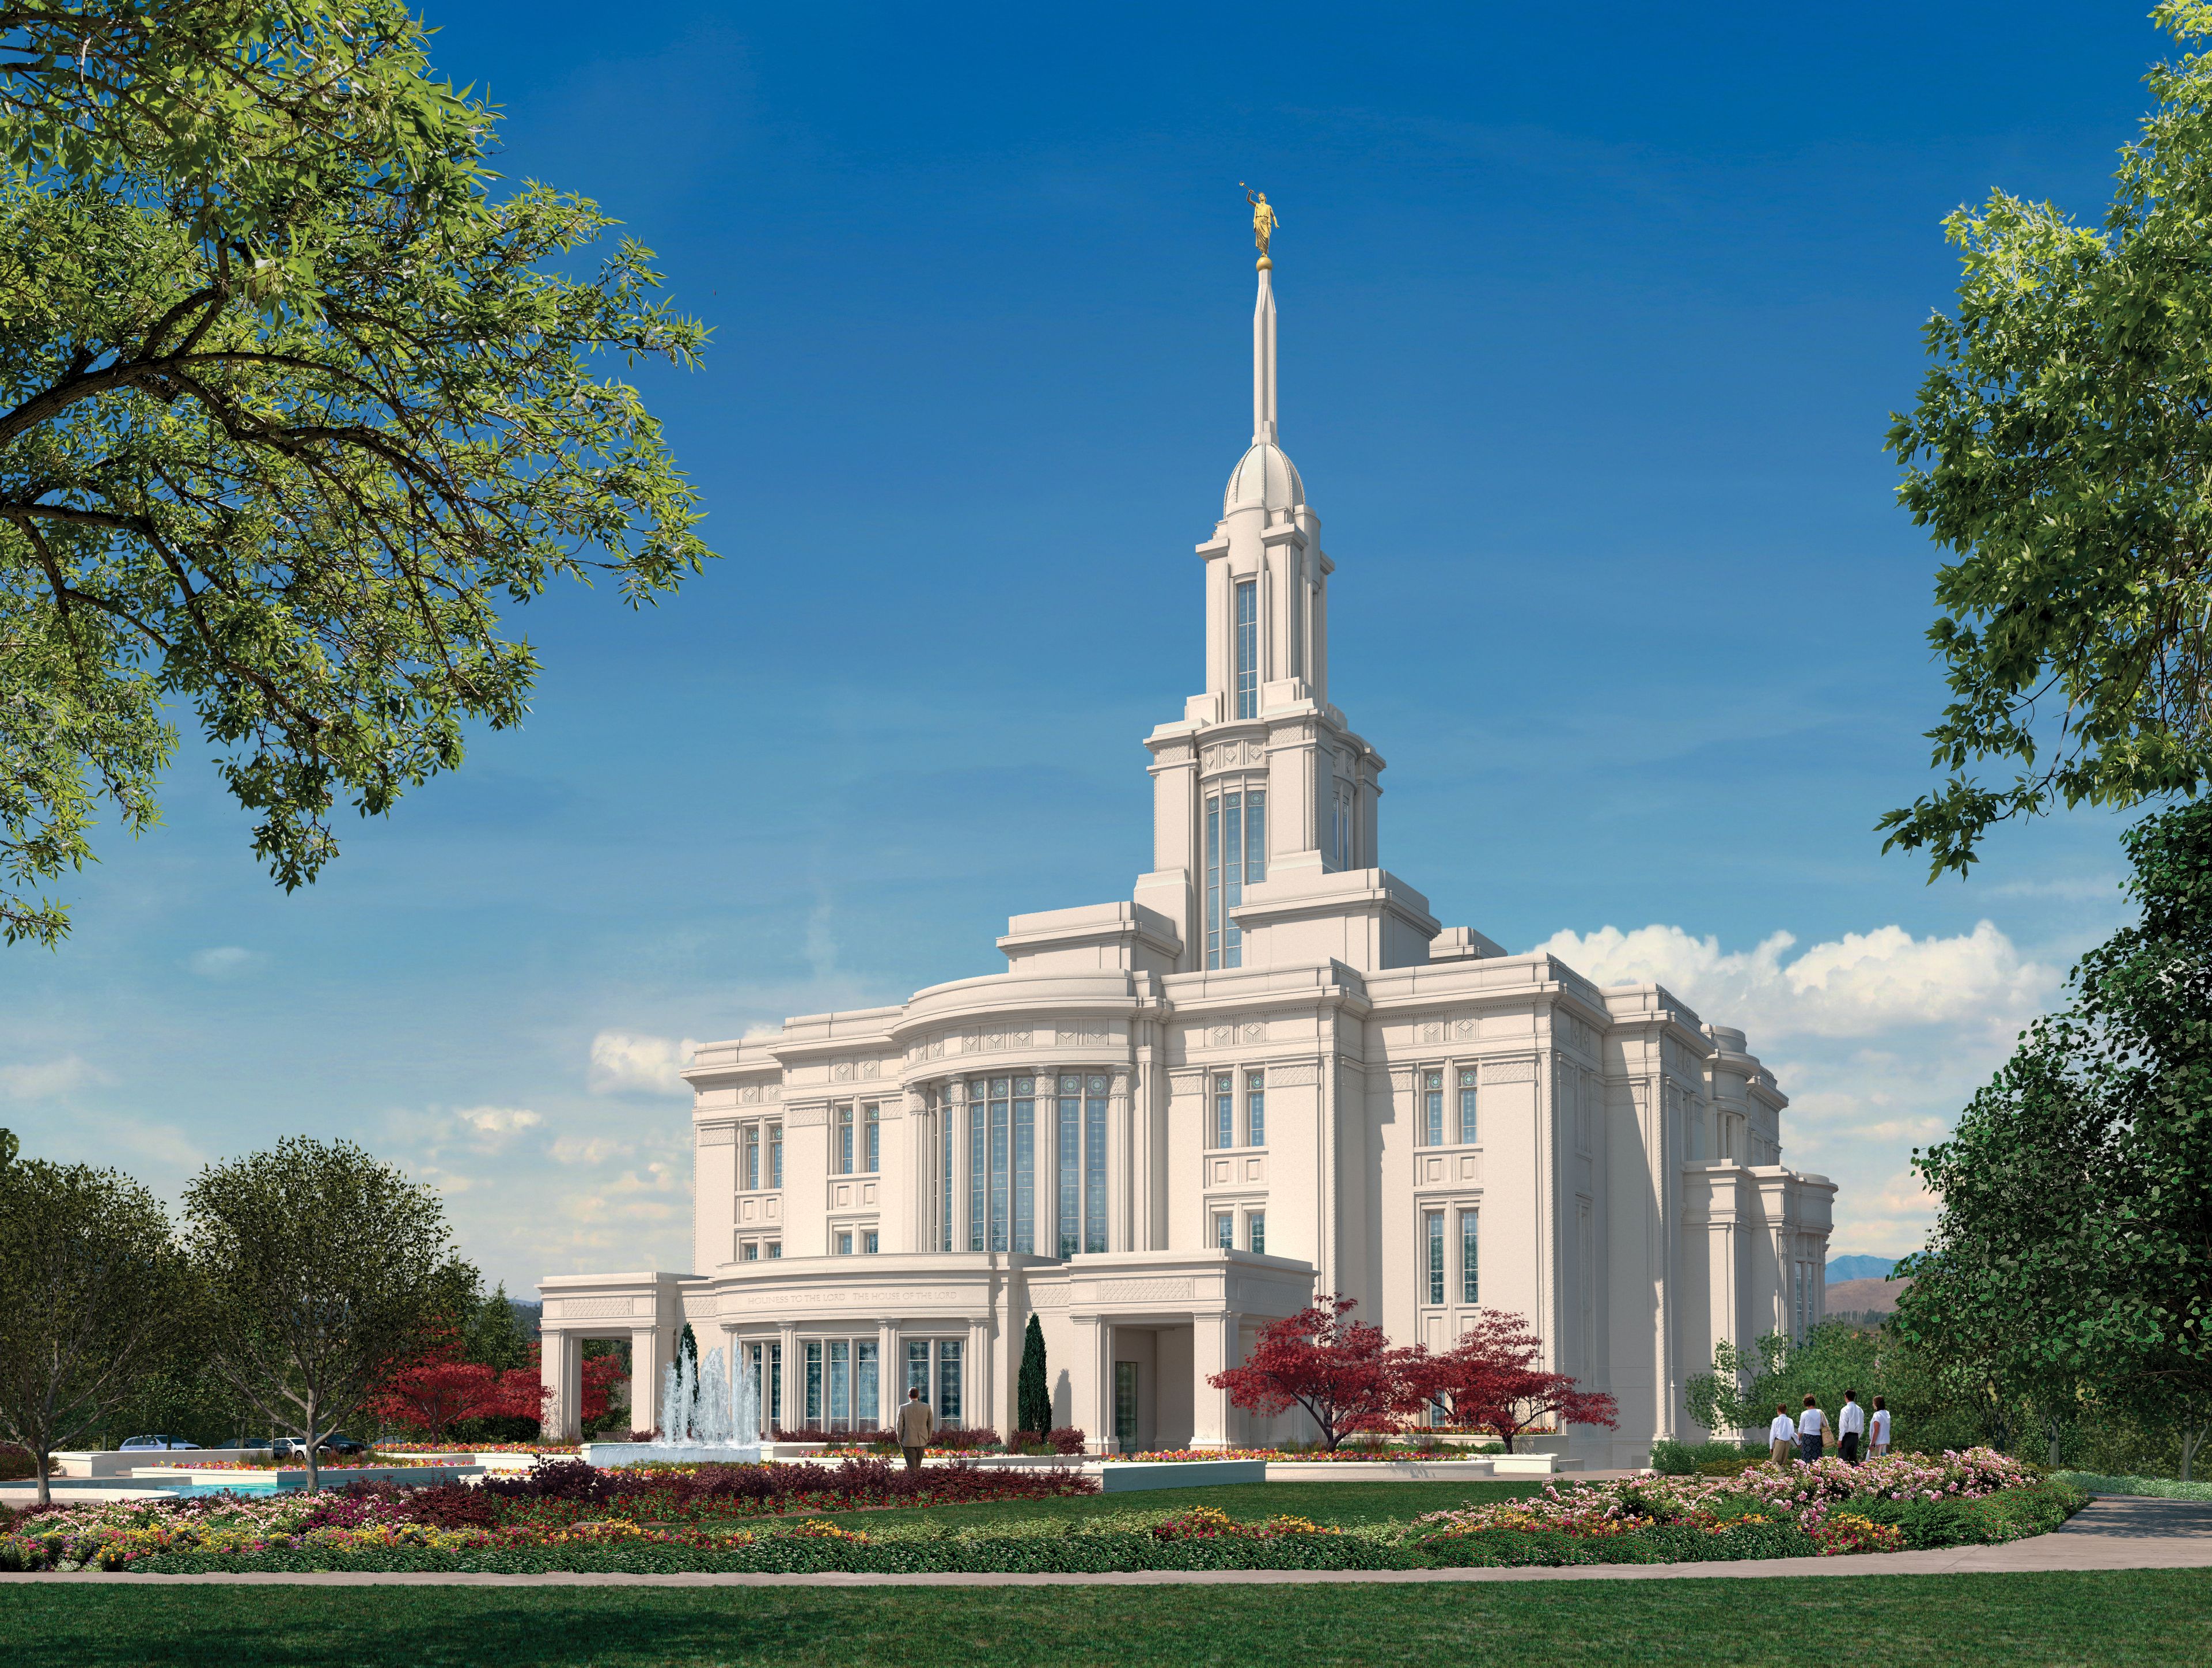 An artist’s rendition of the Payson Utah Temple, including the entrance and scenery.